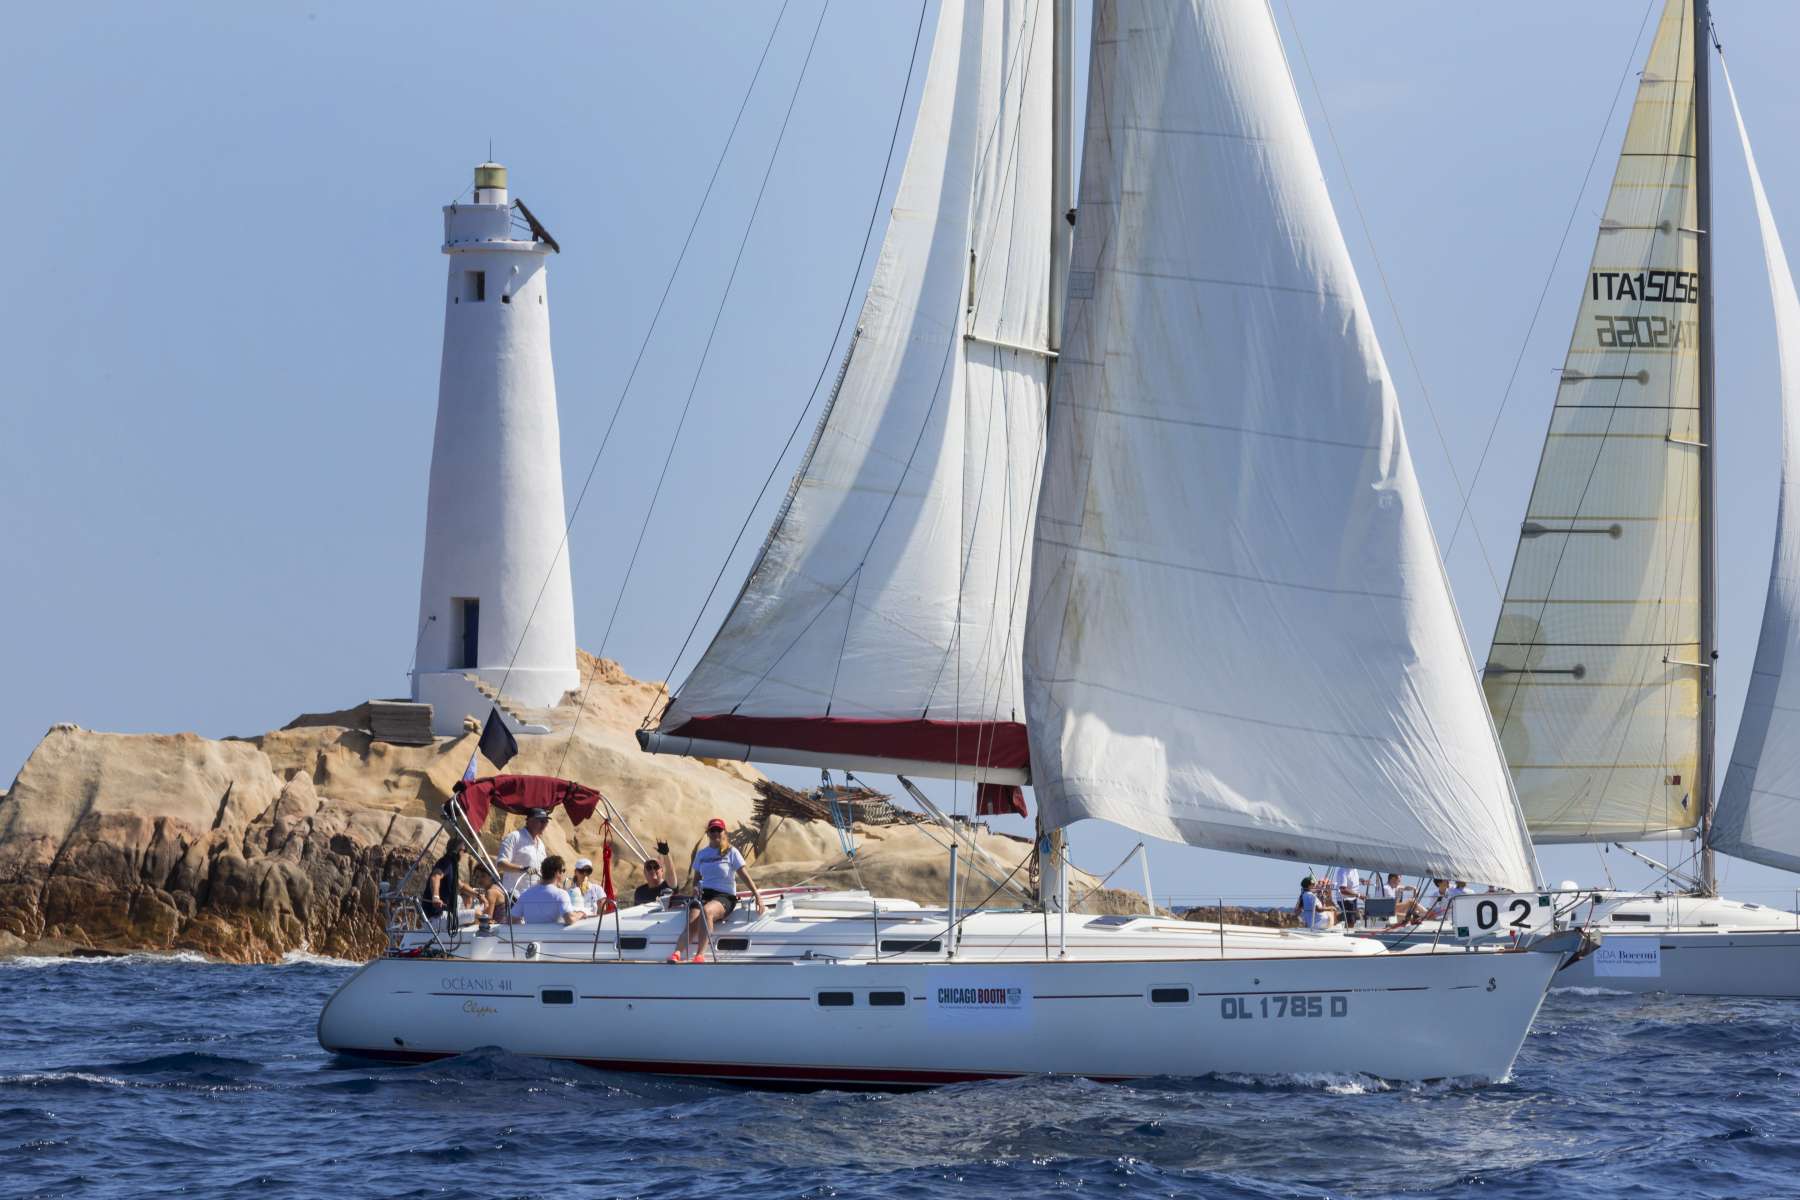 ONE OCEAN MBA'S CONFERENCE & REGATTA - IMAGES FROM DAY 1 ONLINE - NEWS - Yacht Club Costa Smeralda